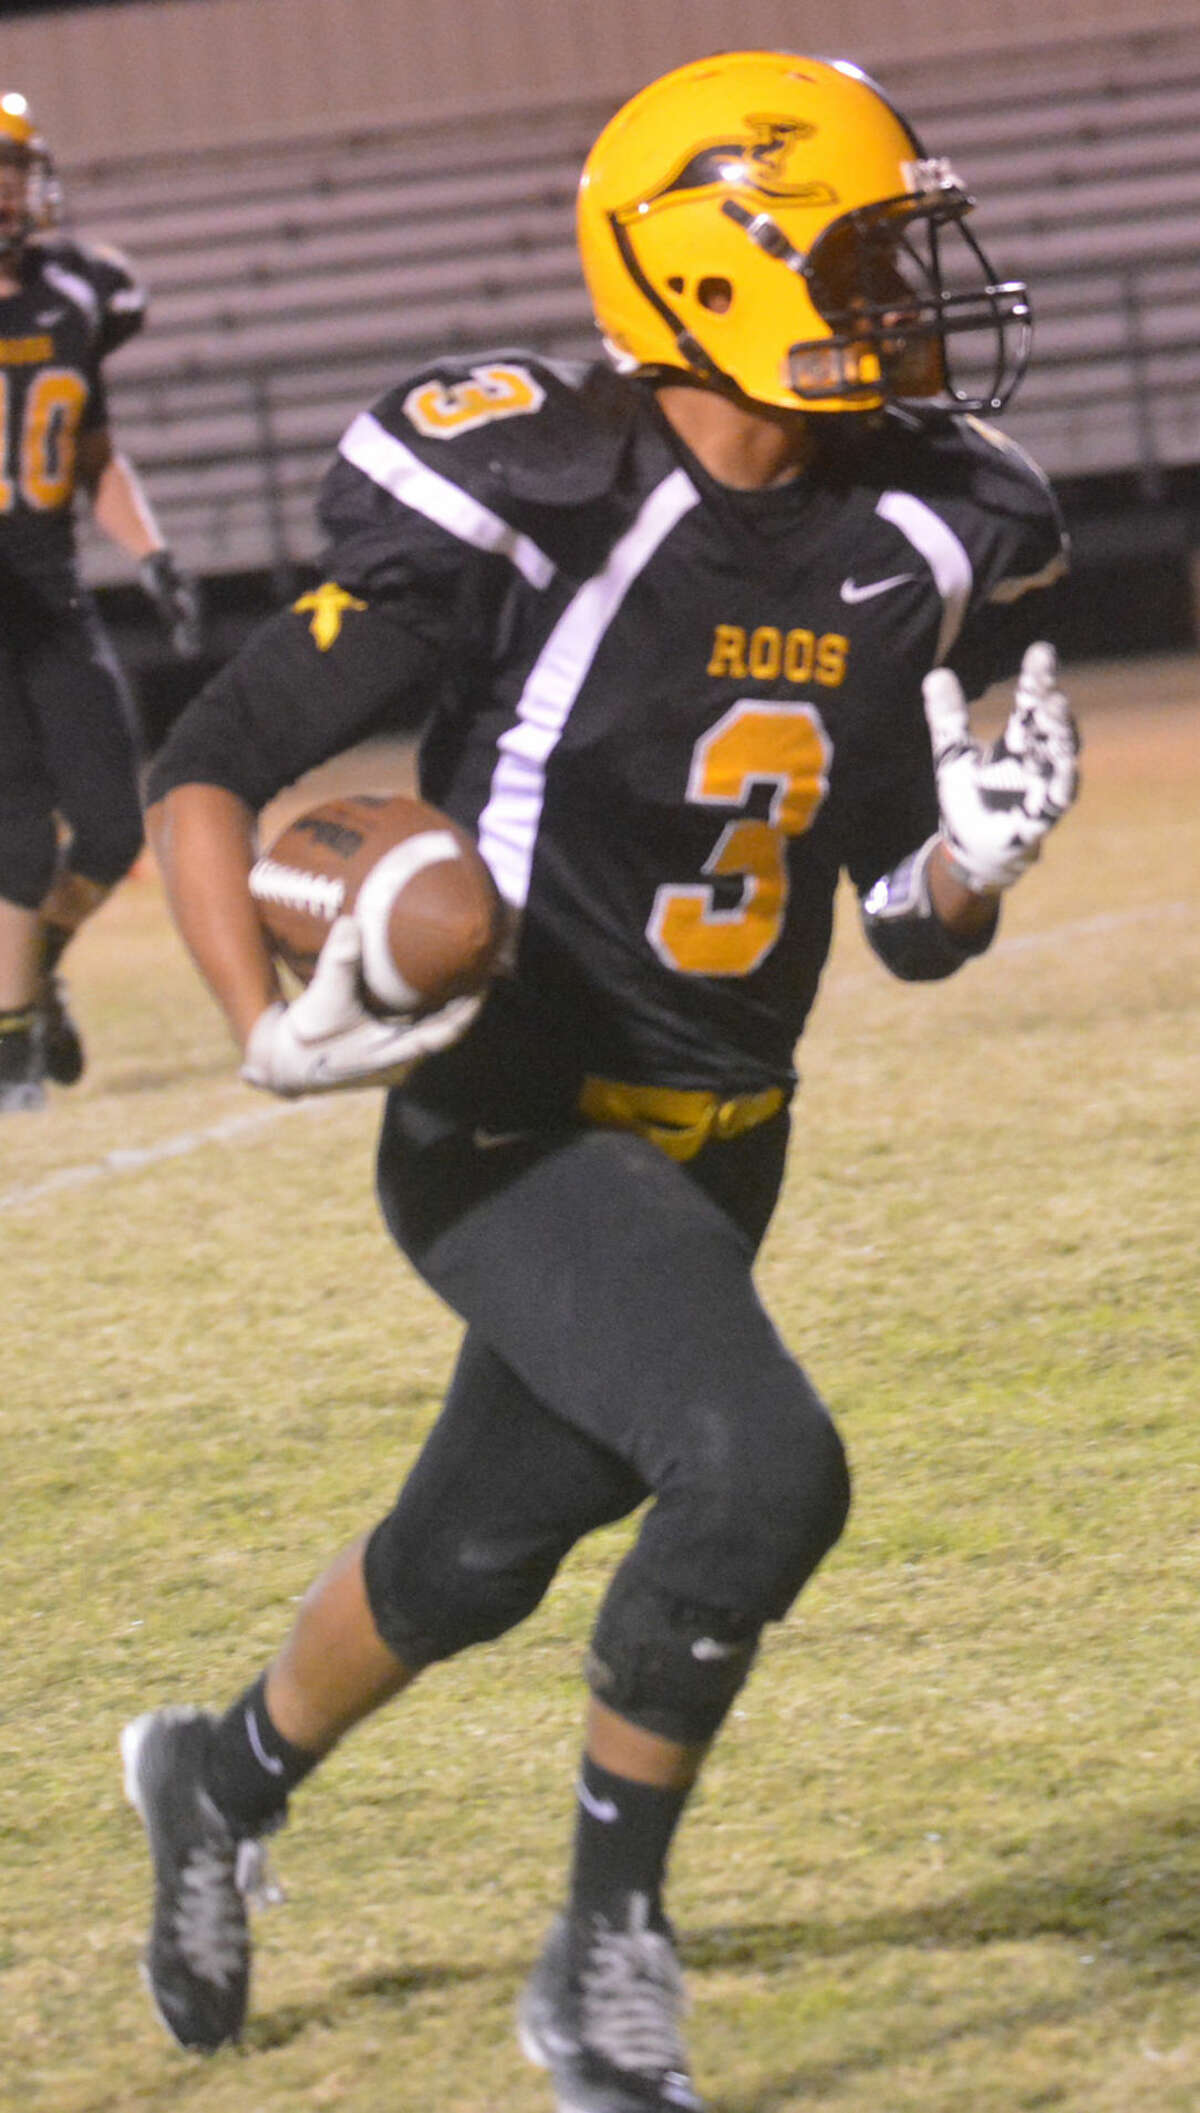 Kress quarterback Jordan Reyes races toward the end zone Friday night. The sophomore scored the winning touchdown with 19 second s left to lift the Kangaroos to a district championship.